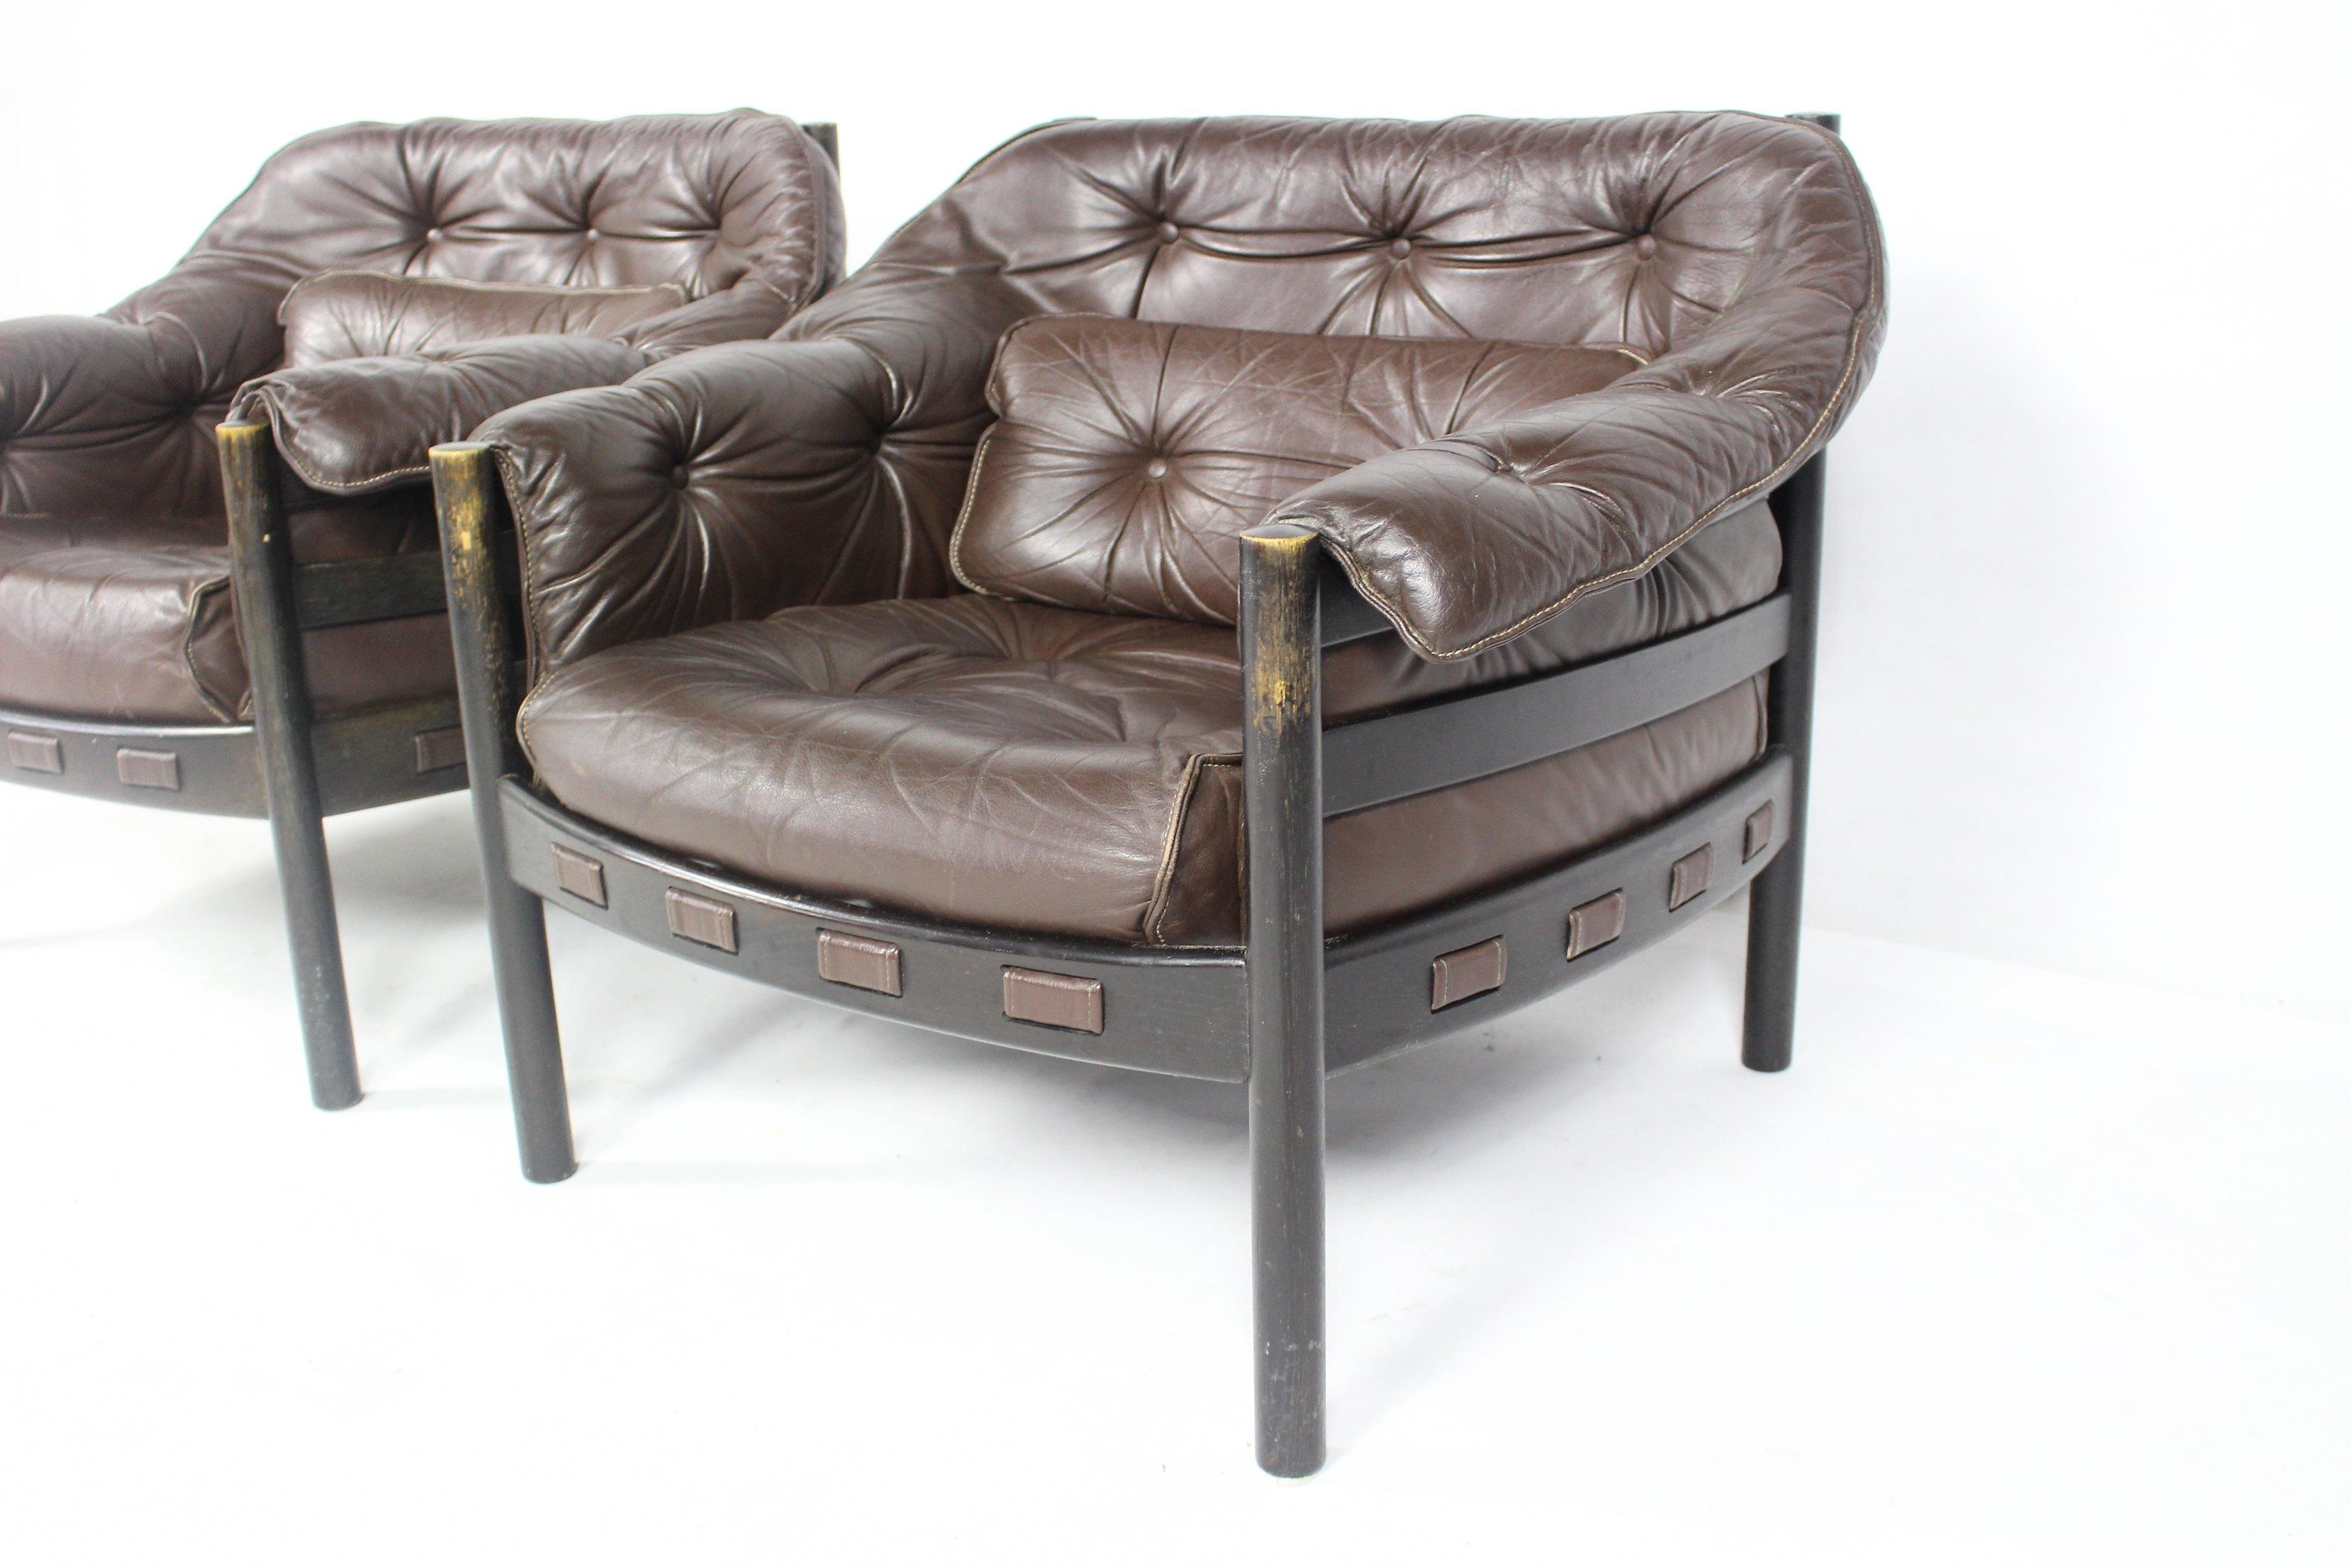 1960s Sven Ellekaer Brown Leather Chairs For Coja  For Sale 3